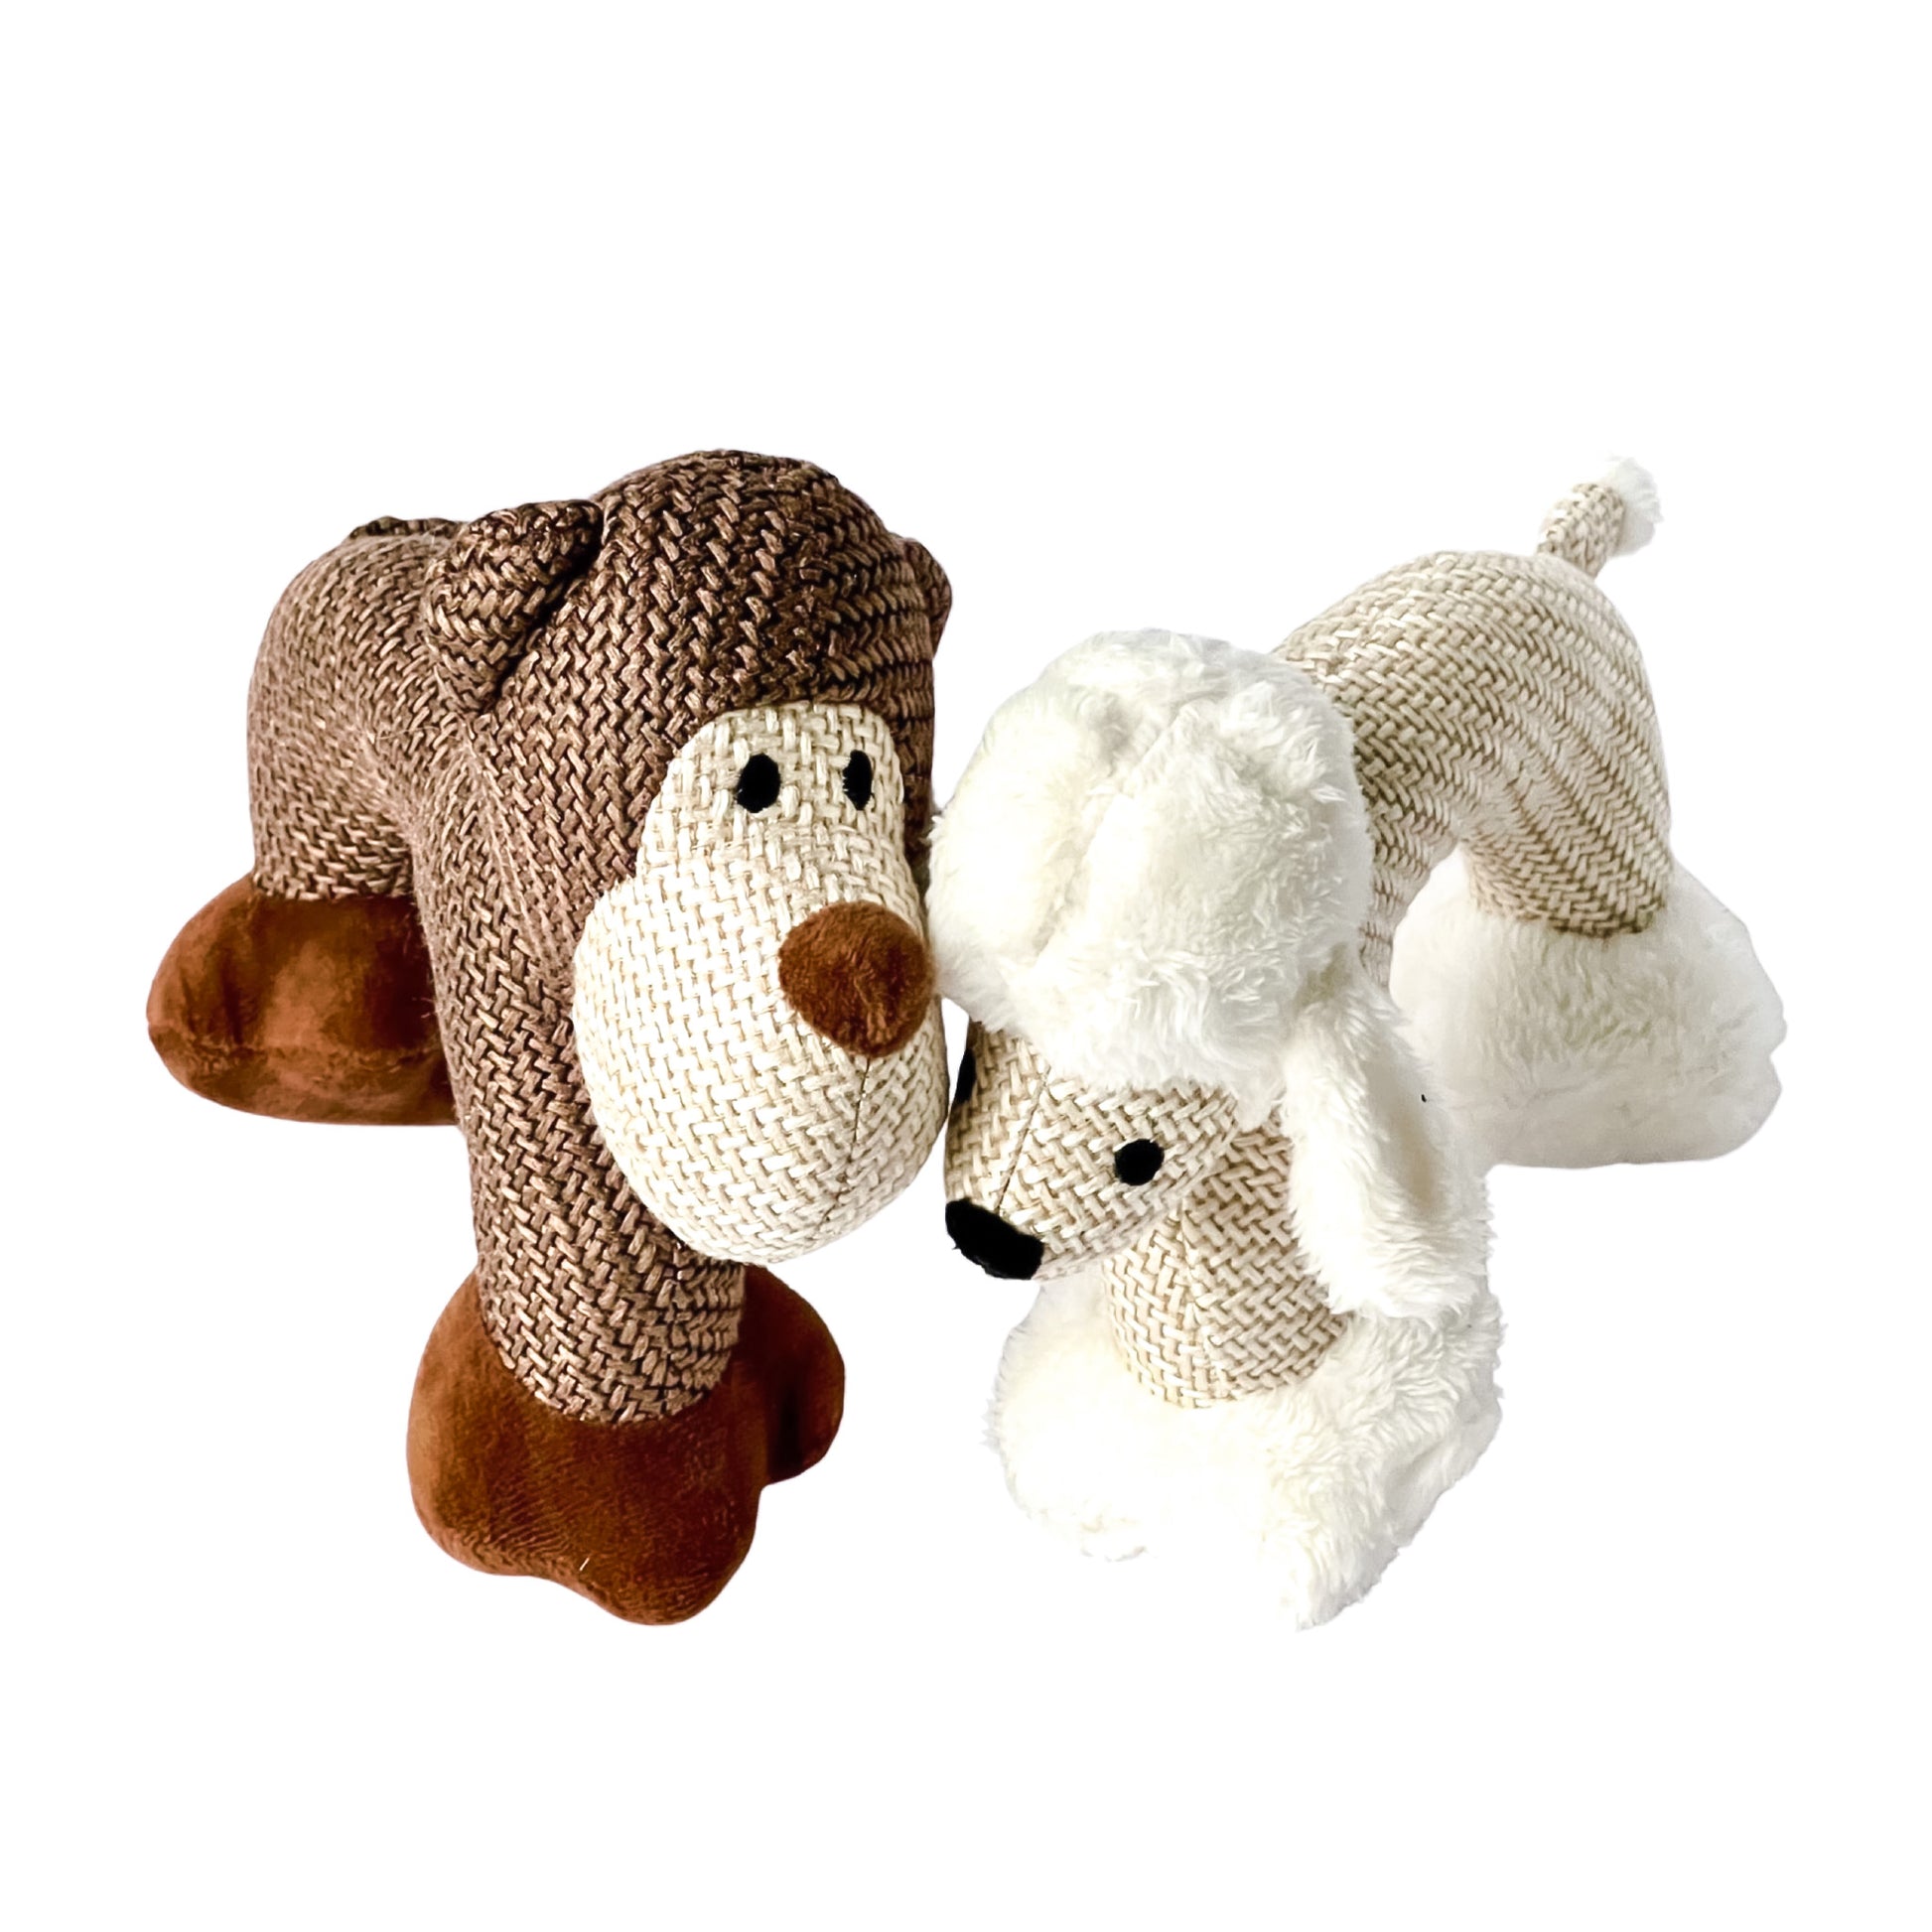 Squeaky monkey and Squeaky sheep luxury dog toys from Border Loves